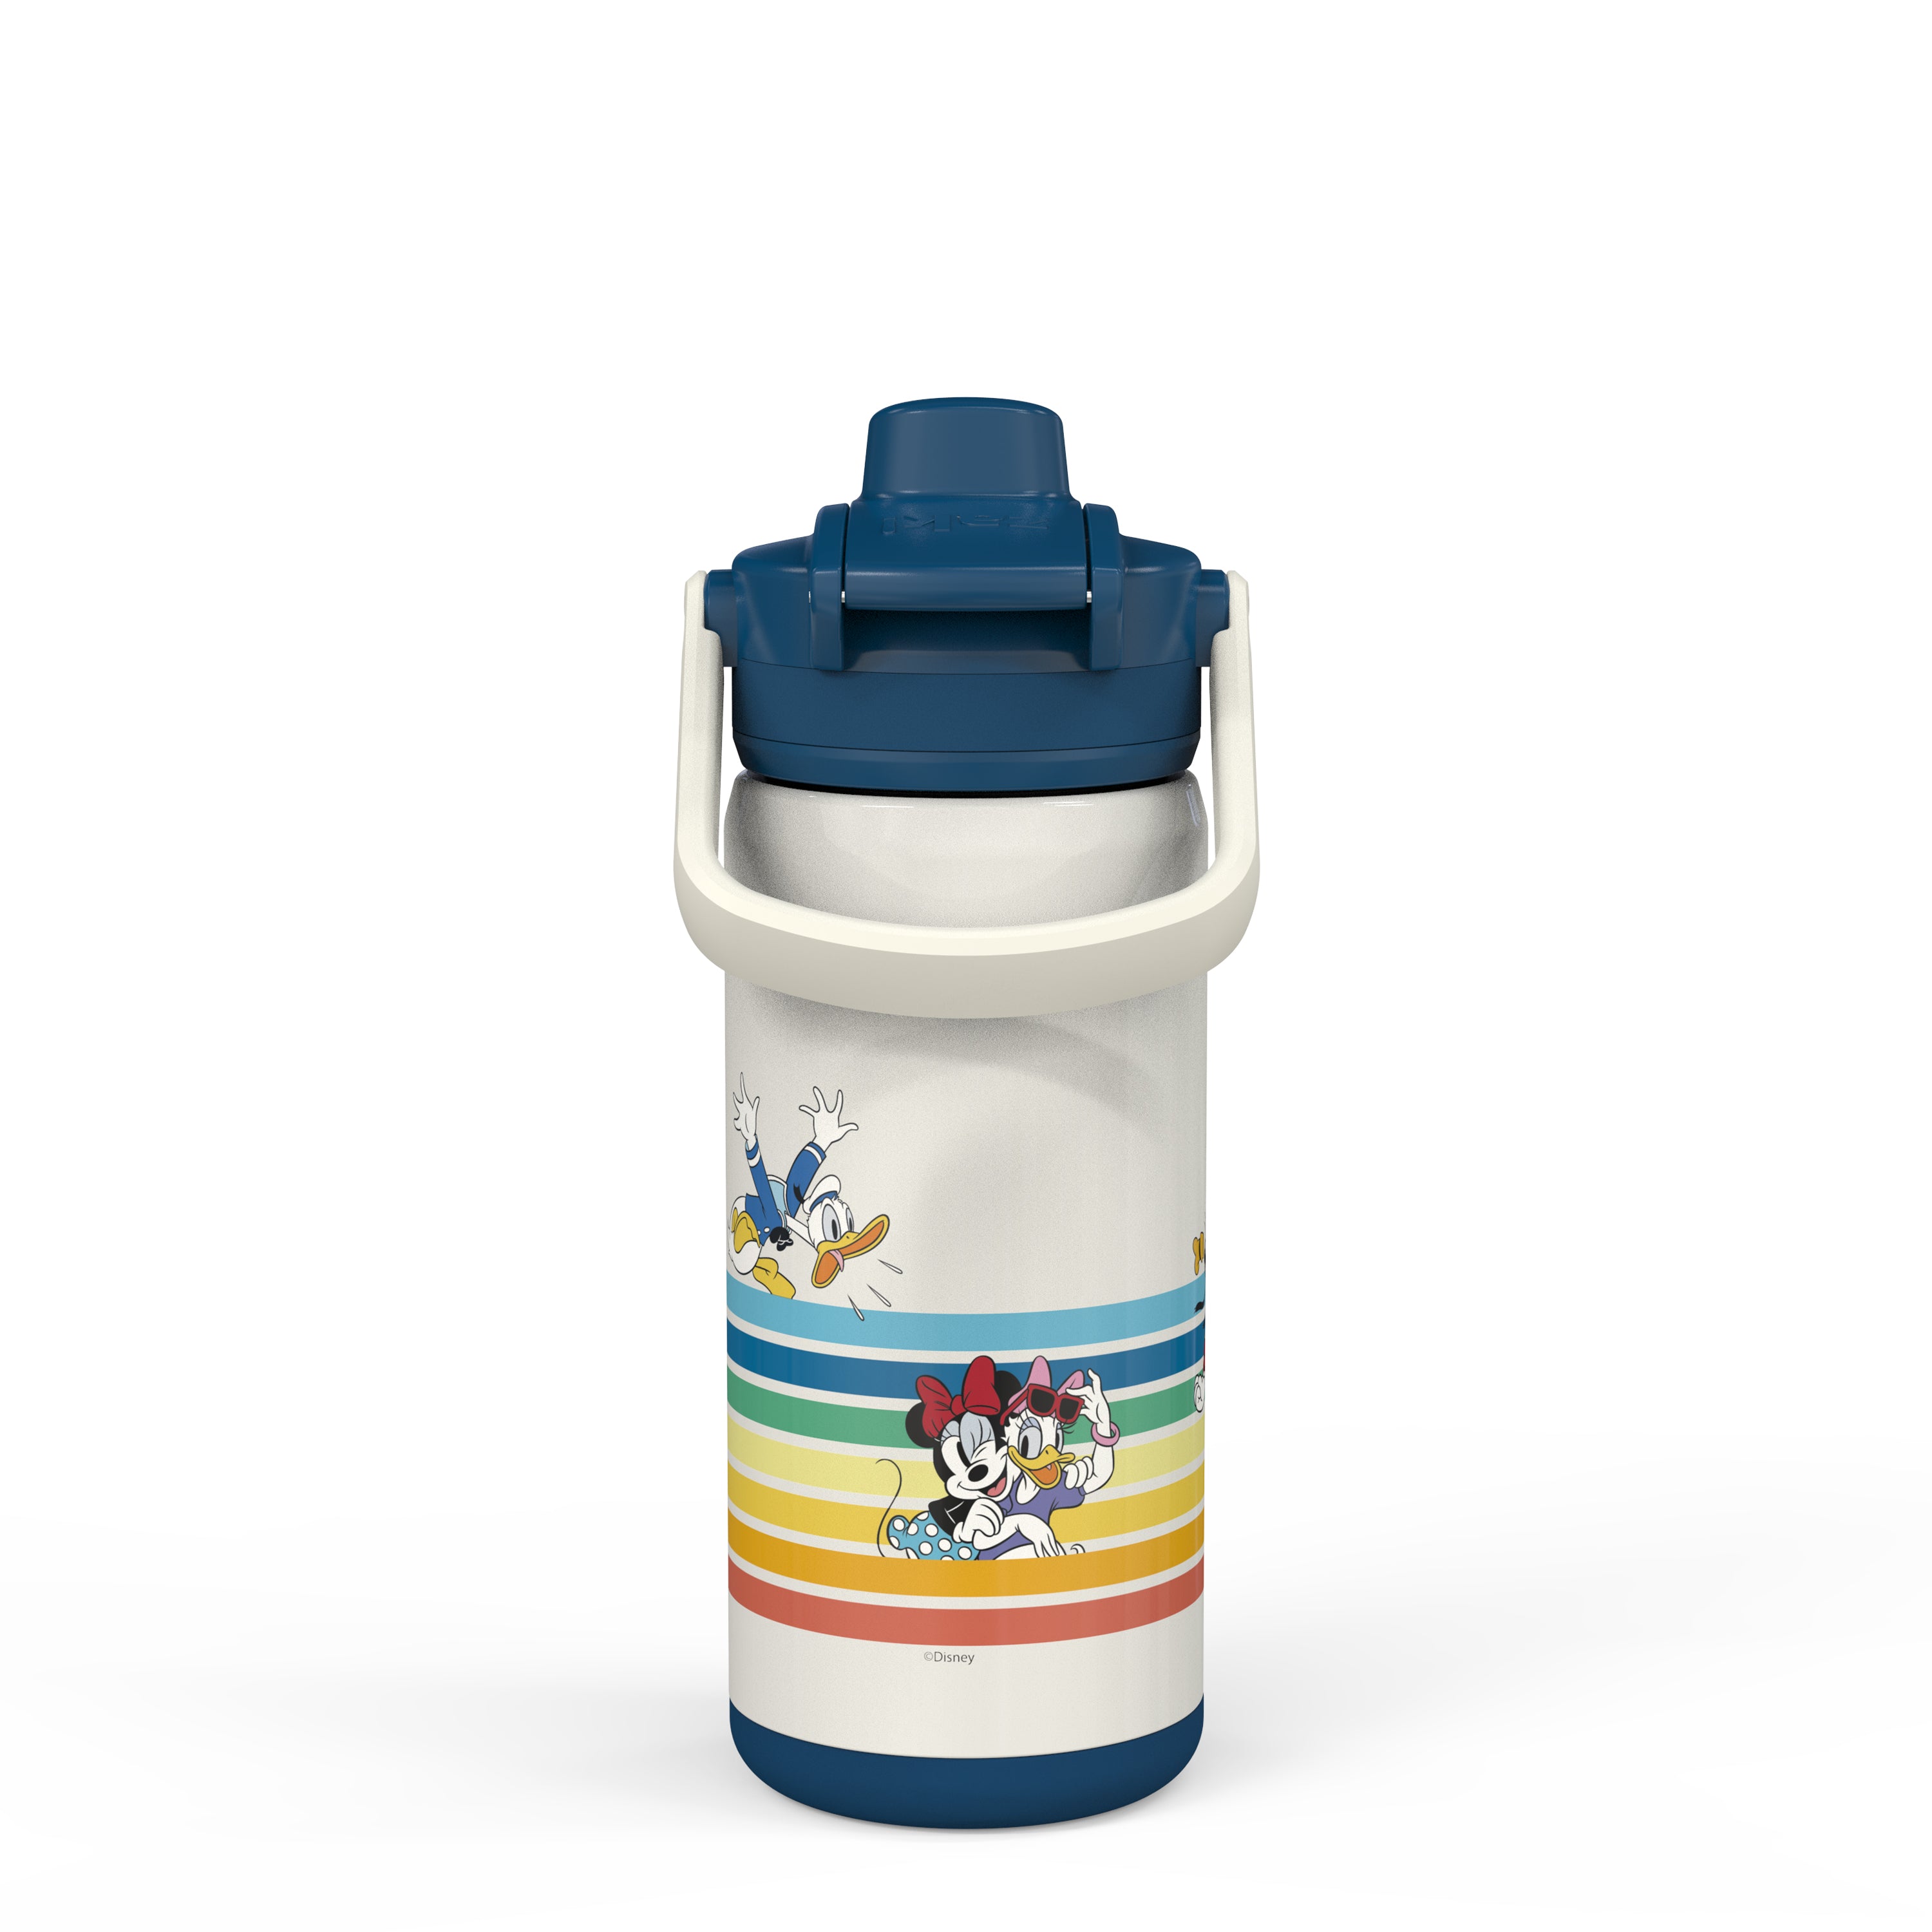 Disney Water Bottle With Clip - Stainless Steel Mickey Mouse